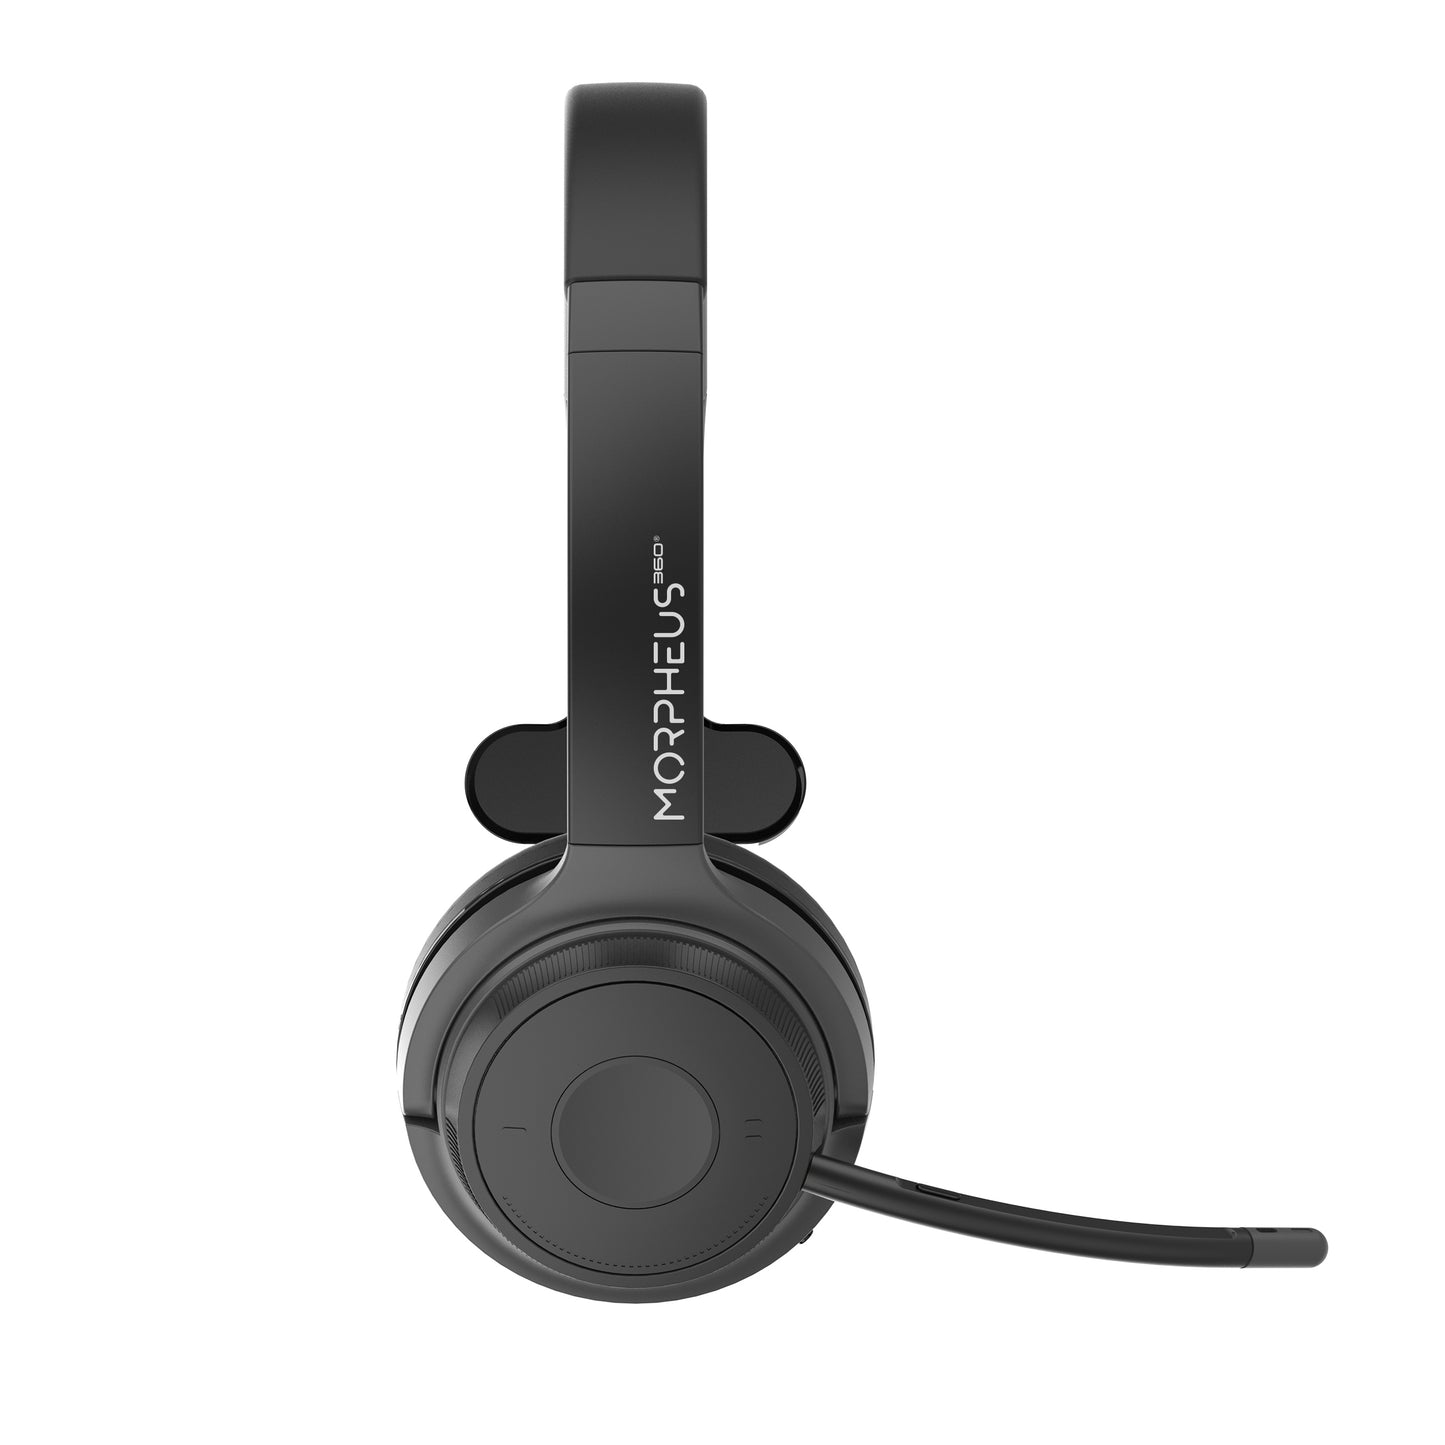 Right profile image of the Advantage Wireless Mono Headset with Boom Microphone.